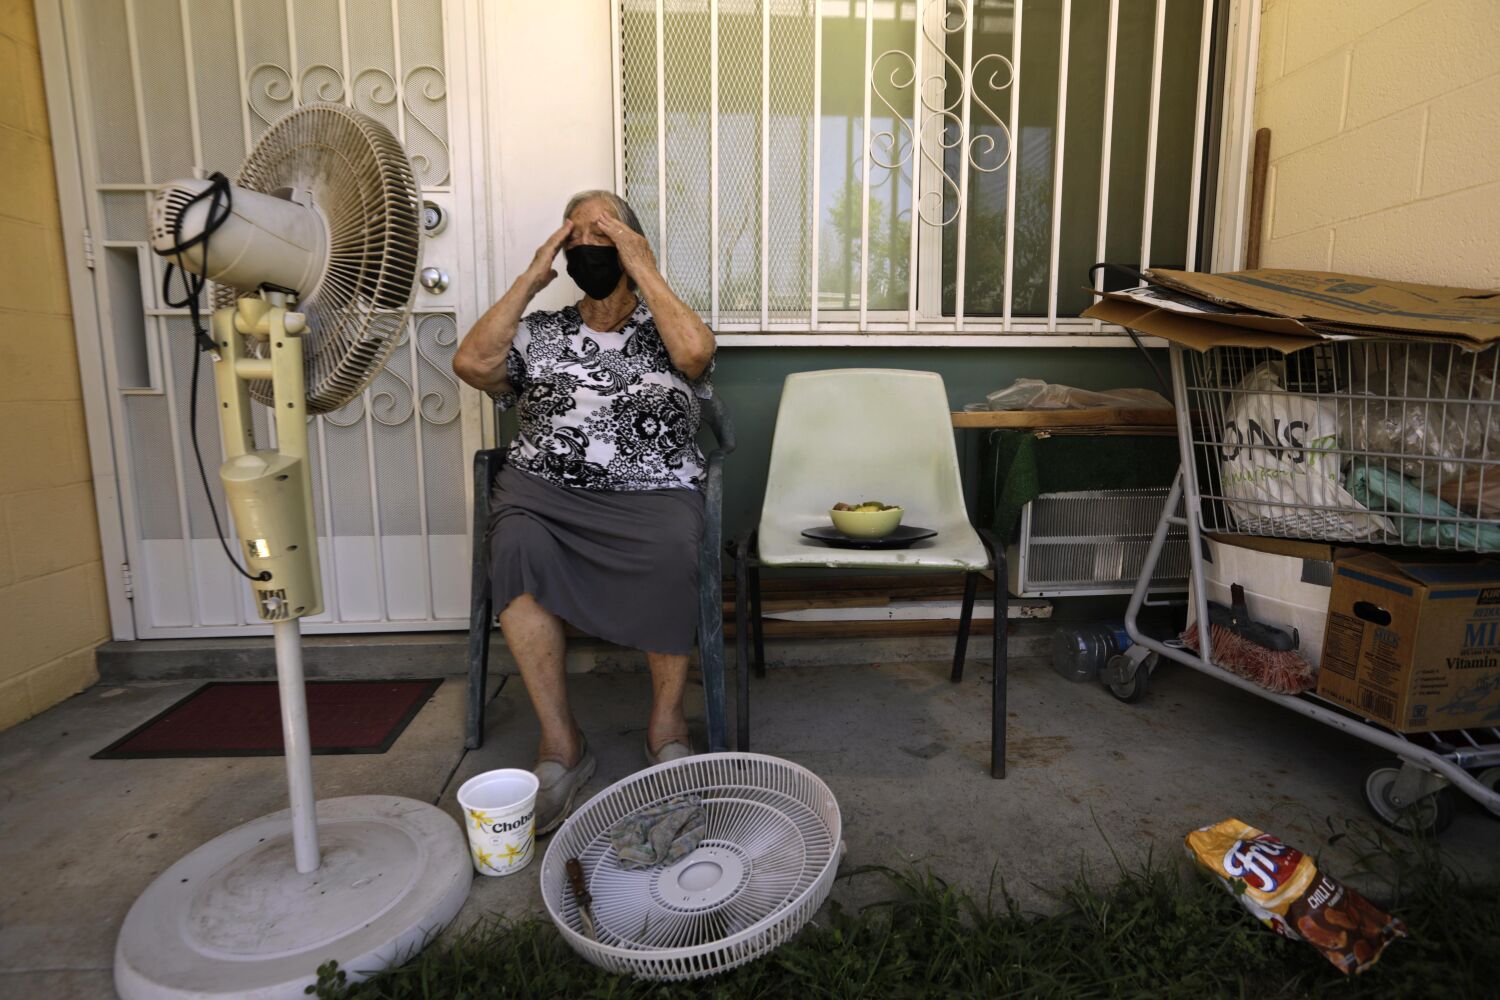 With forecasts for a sweltering summer, L.A. vows to improve response to extreme heat